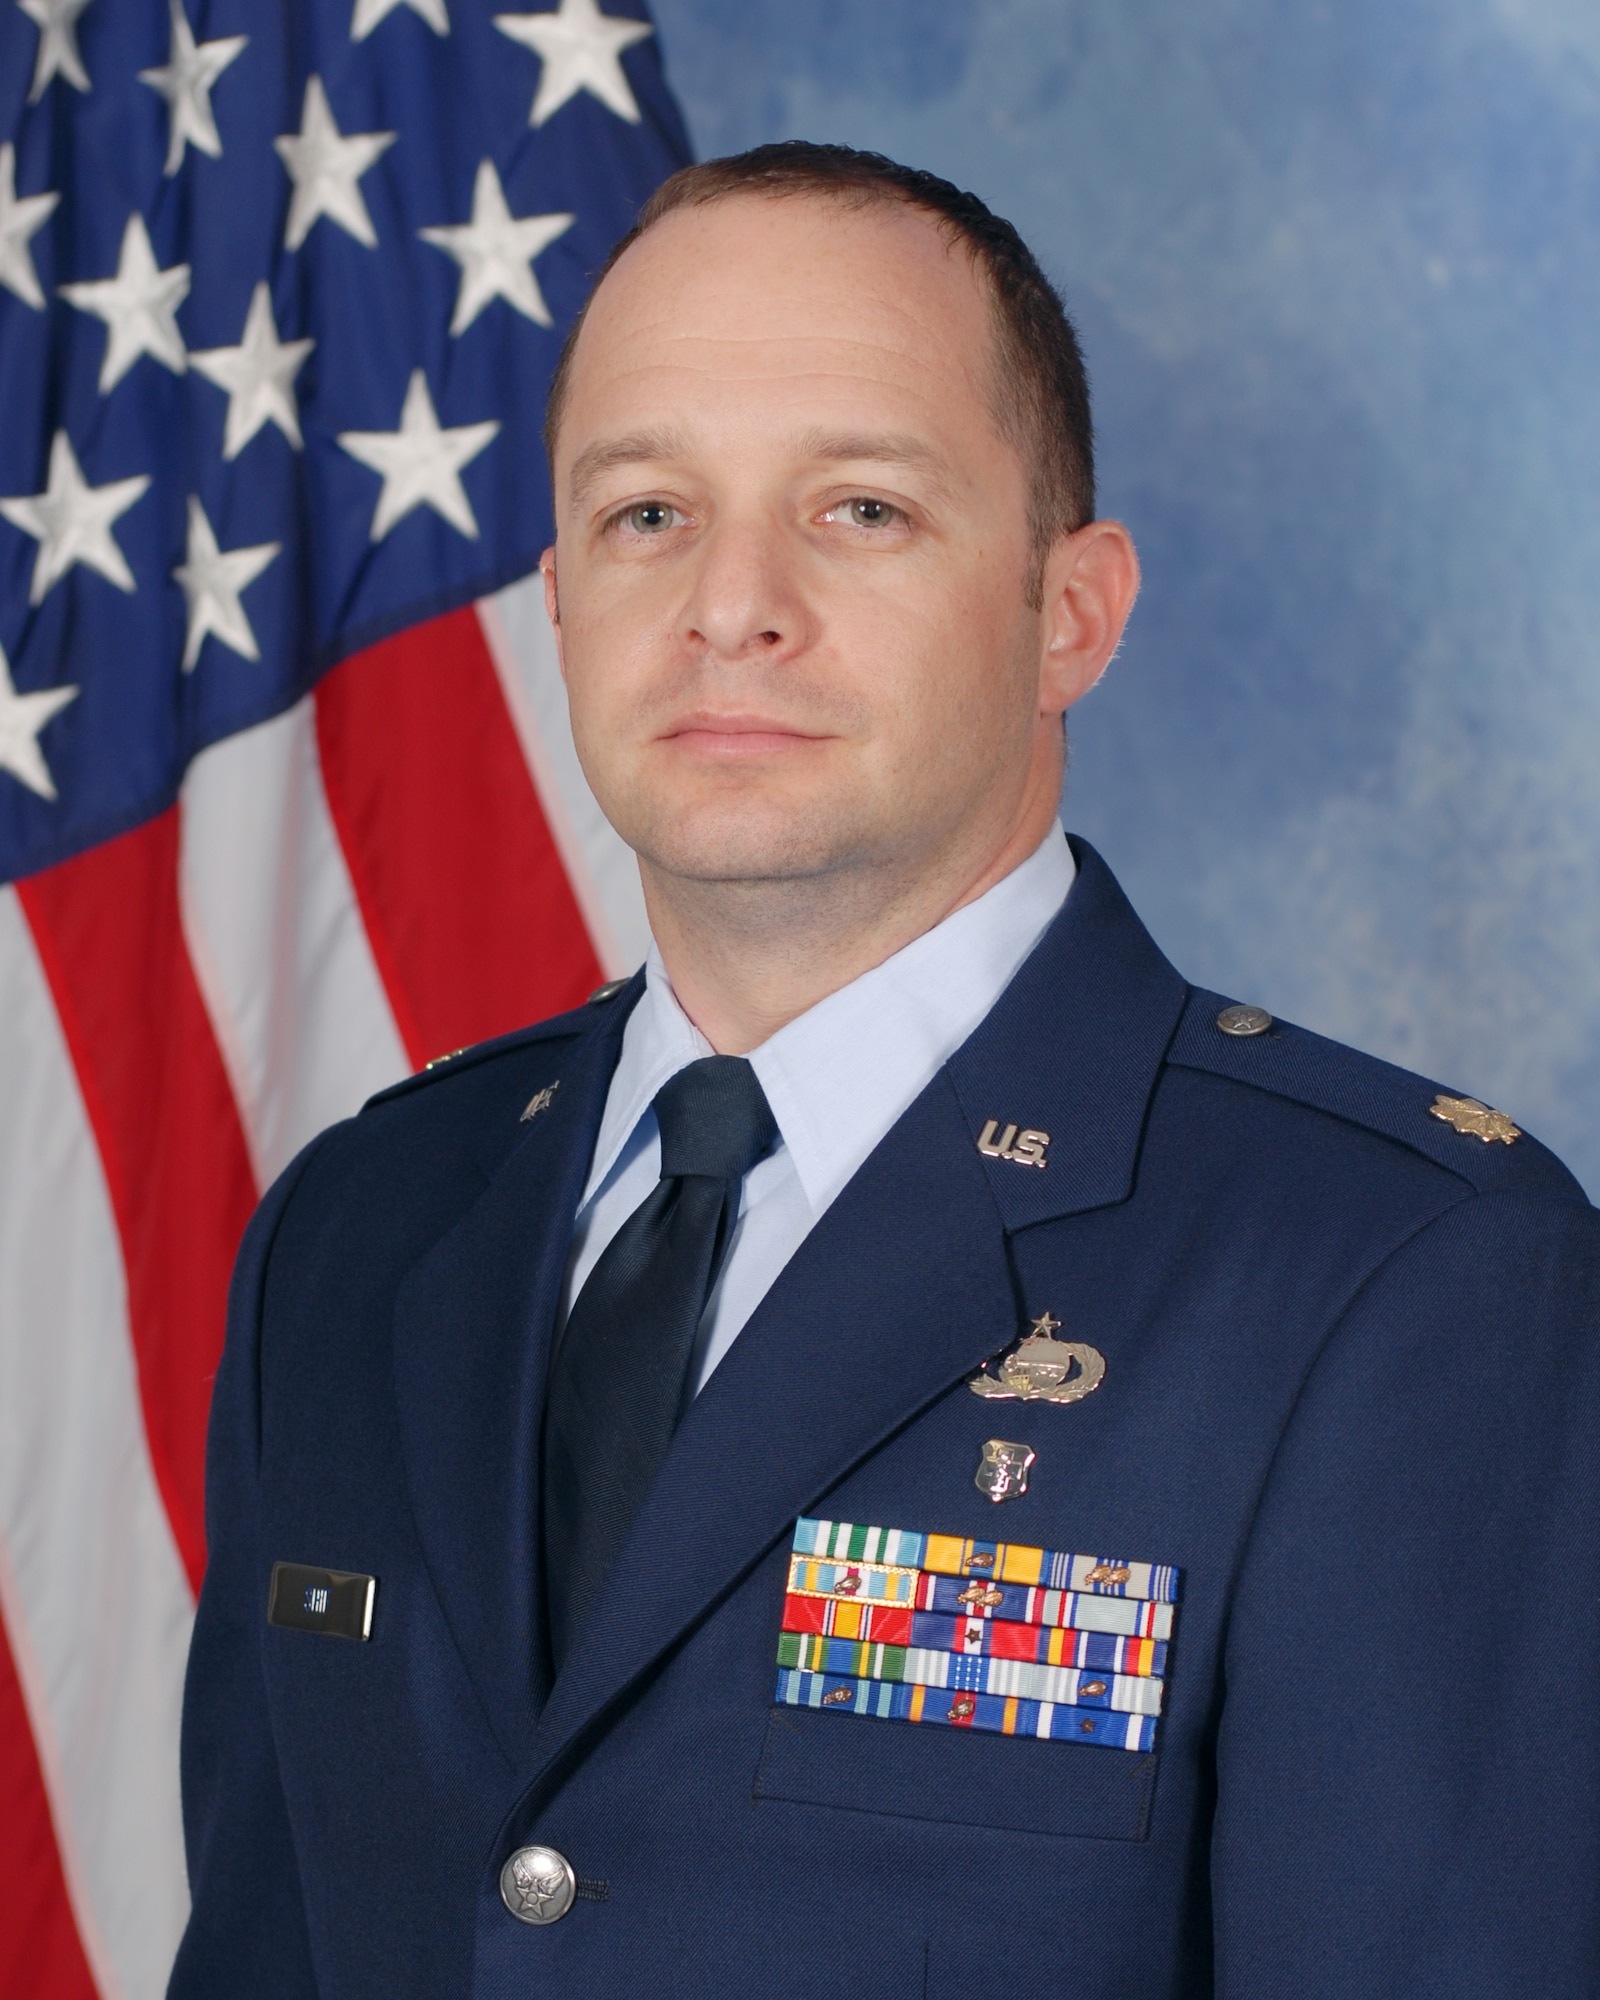 Maj. Boris Shif, previous assistant director of operations for the 316th Training Squadron, recently earned the Tuskegee Airmen, Inc. Gen. Benjamin O. Davis, Jr. Military Award for his accomplishments while assigned to the 316th TRS.  The award is presented to officers who display outstanding leadership and professional development.

